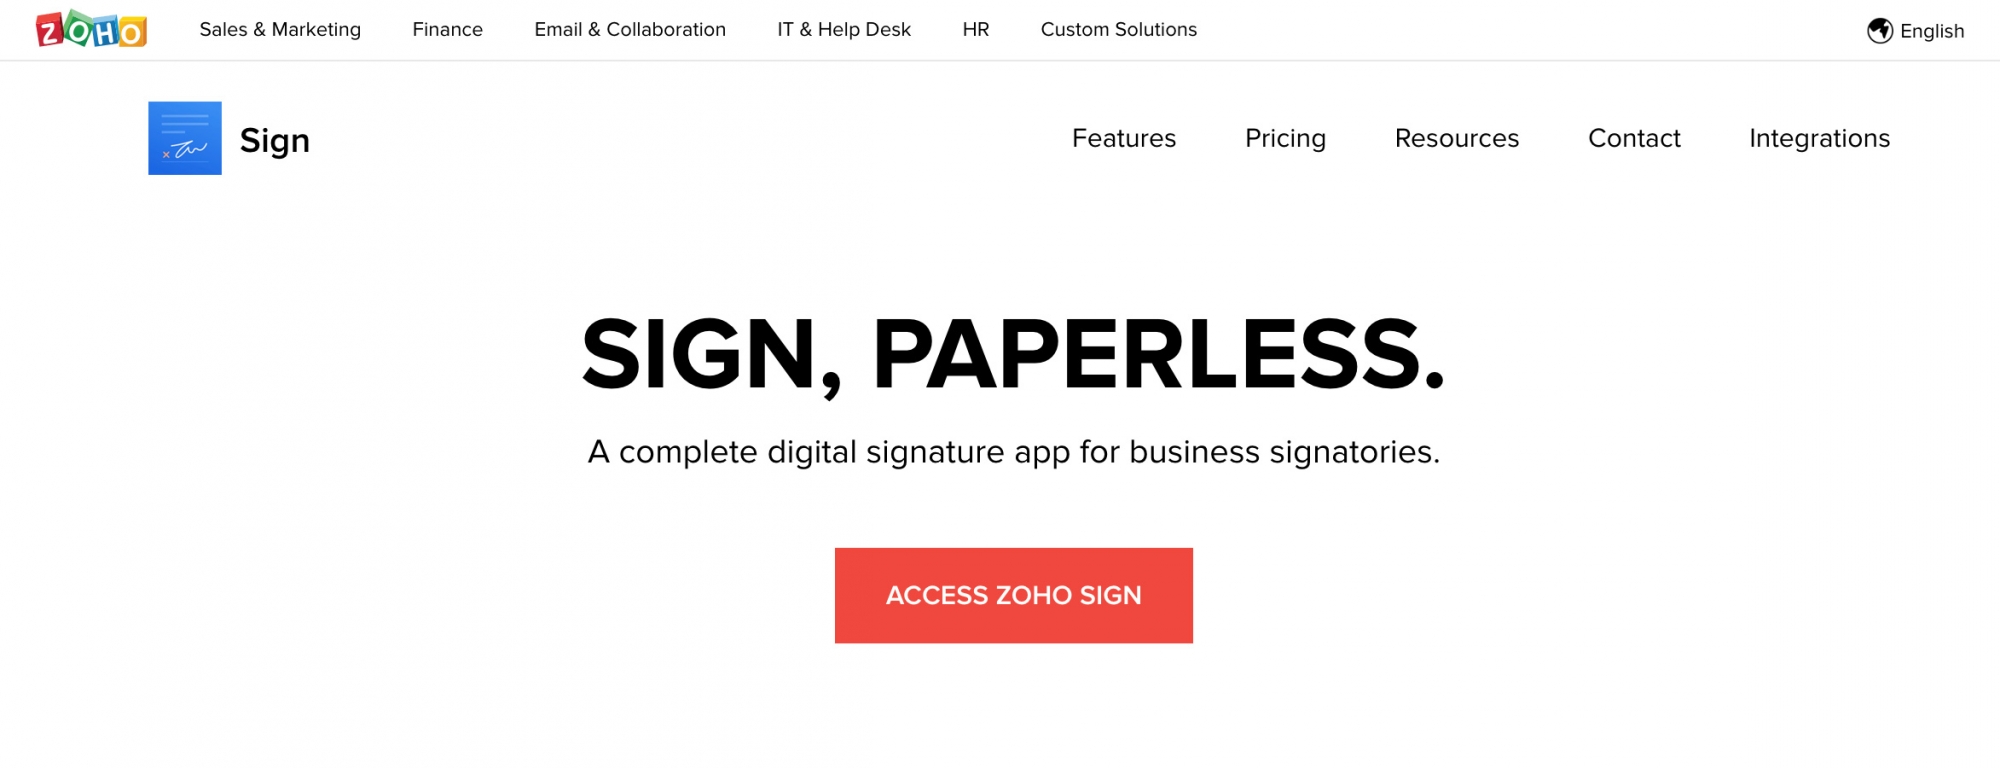 Sign, paperless. Zoho Sign - A complete digital signature app for business signatories. Access Zoho Sign now.